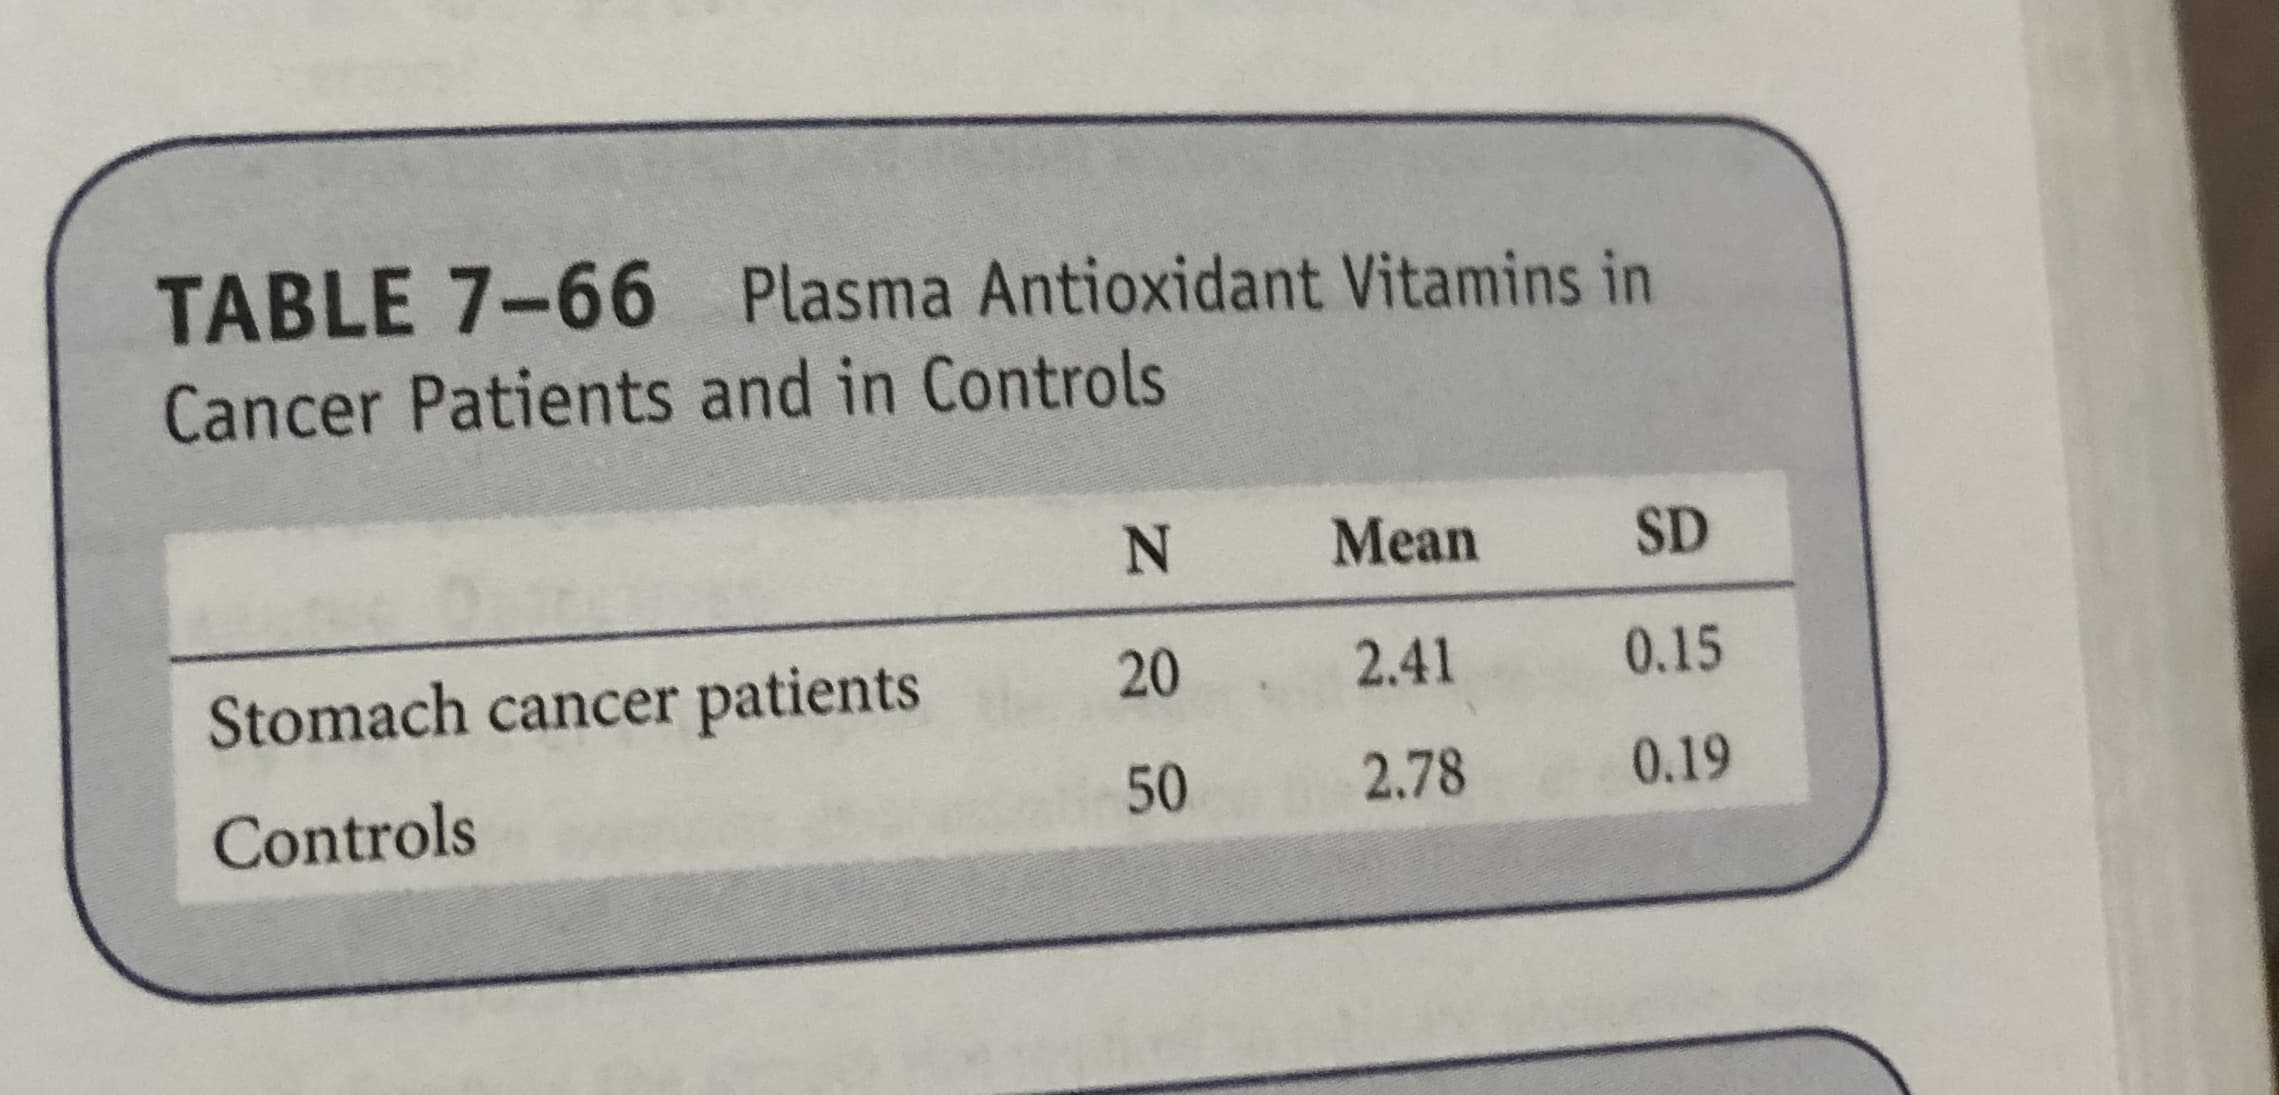 TABLE 7-66
Plasma Antioxidant Vitamins in
Cancer Patients and in Controls
Mean
SD
0.15
20
2.41
Stomach cancer patients
0.19
2.78
50
Controls
Z
